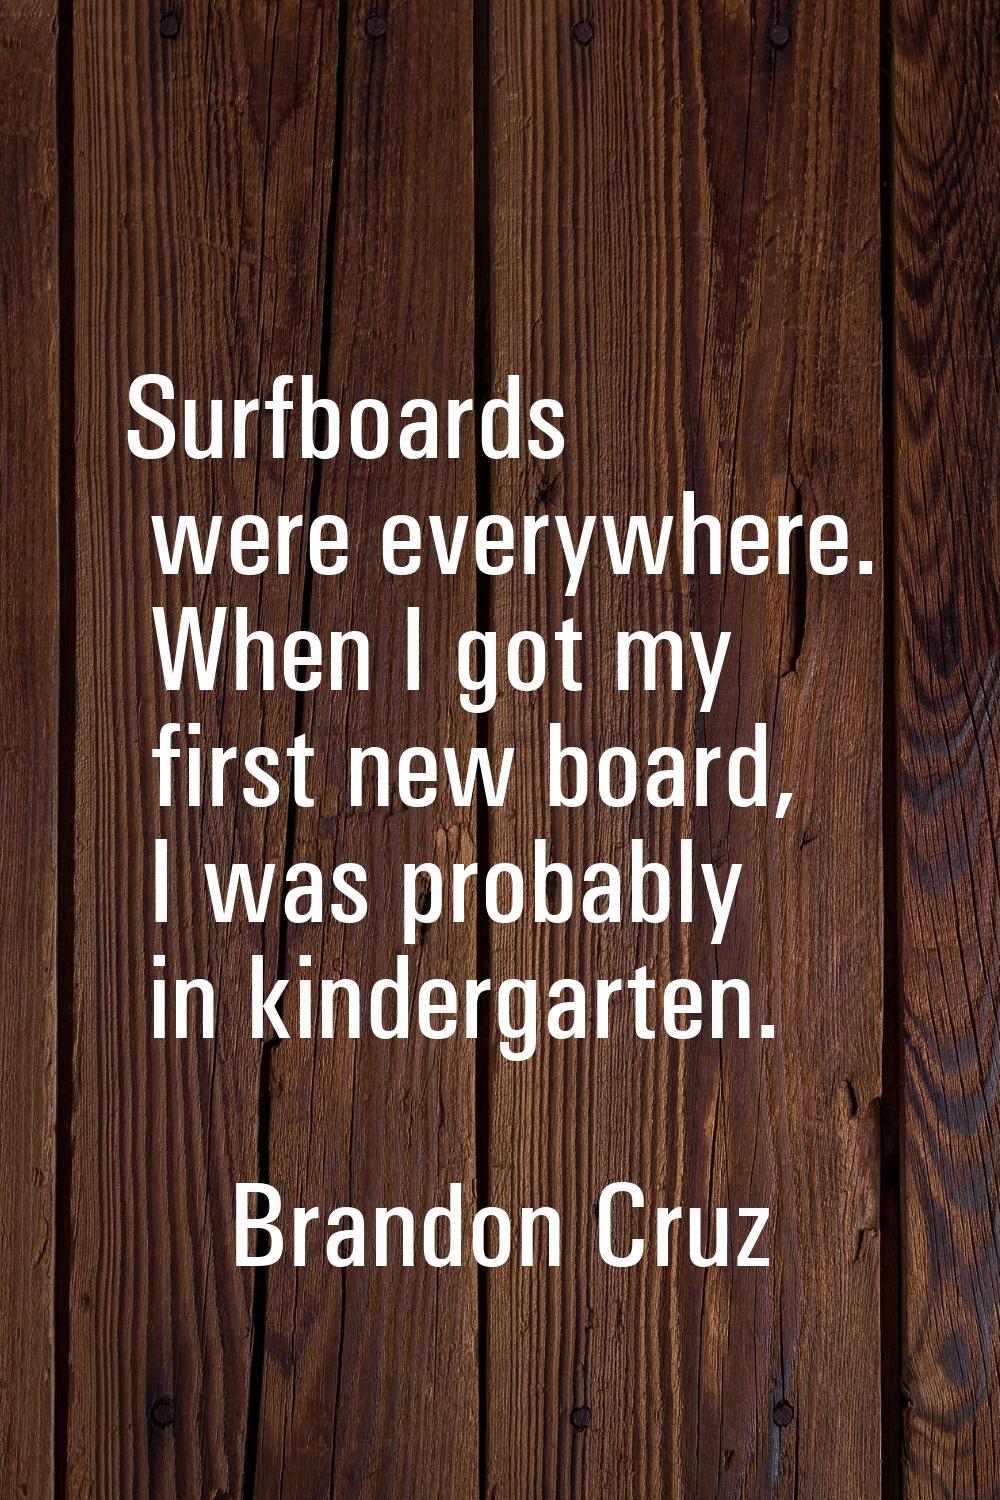 Surfboards were everywhere. When I got my first new board, I was probably in kindergarten.